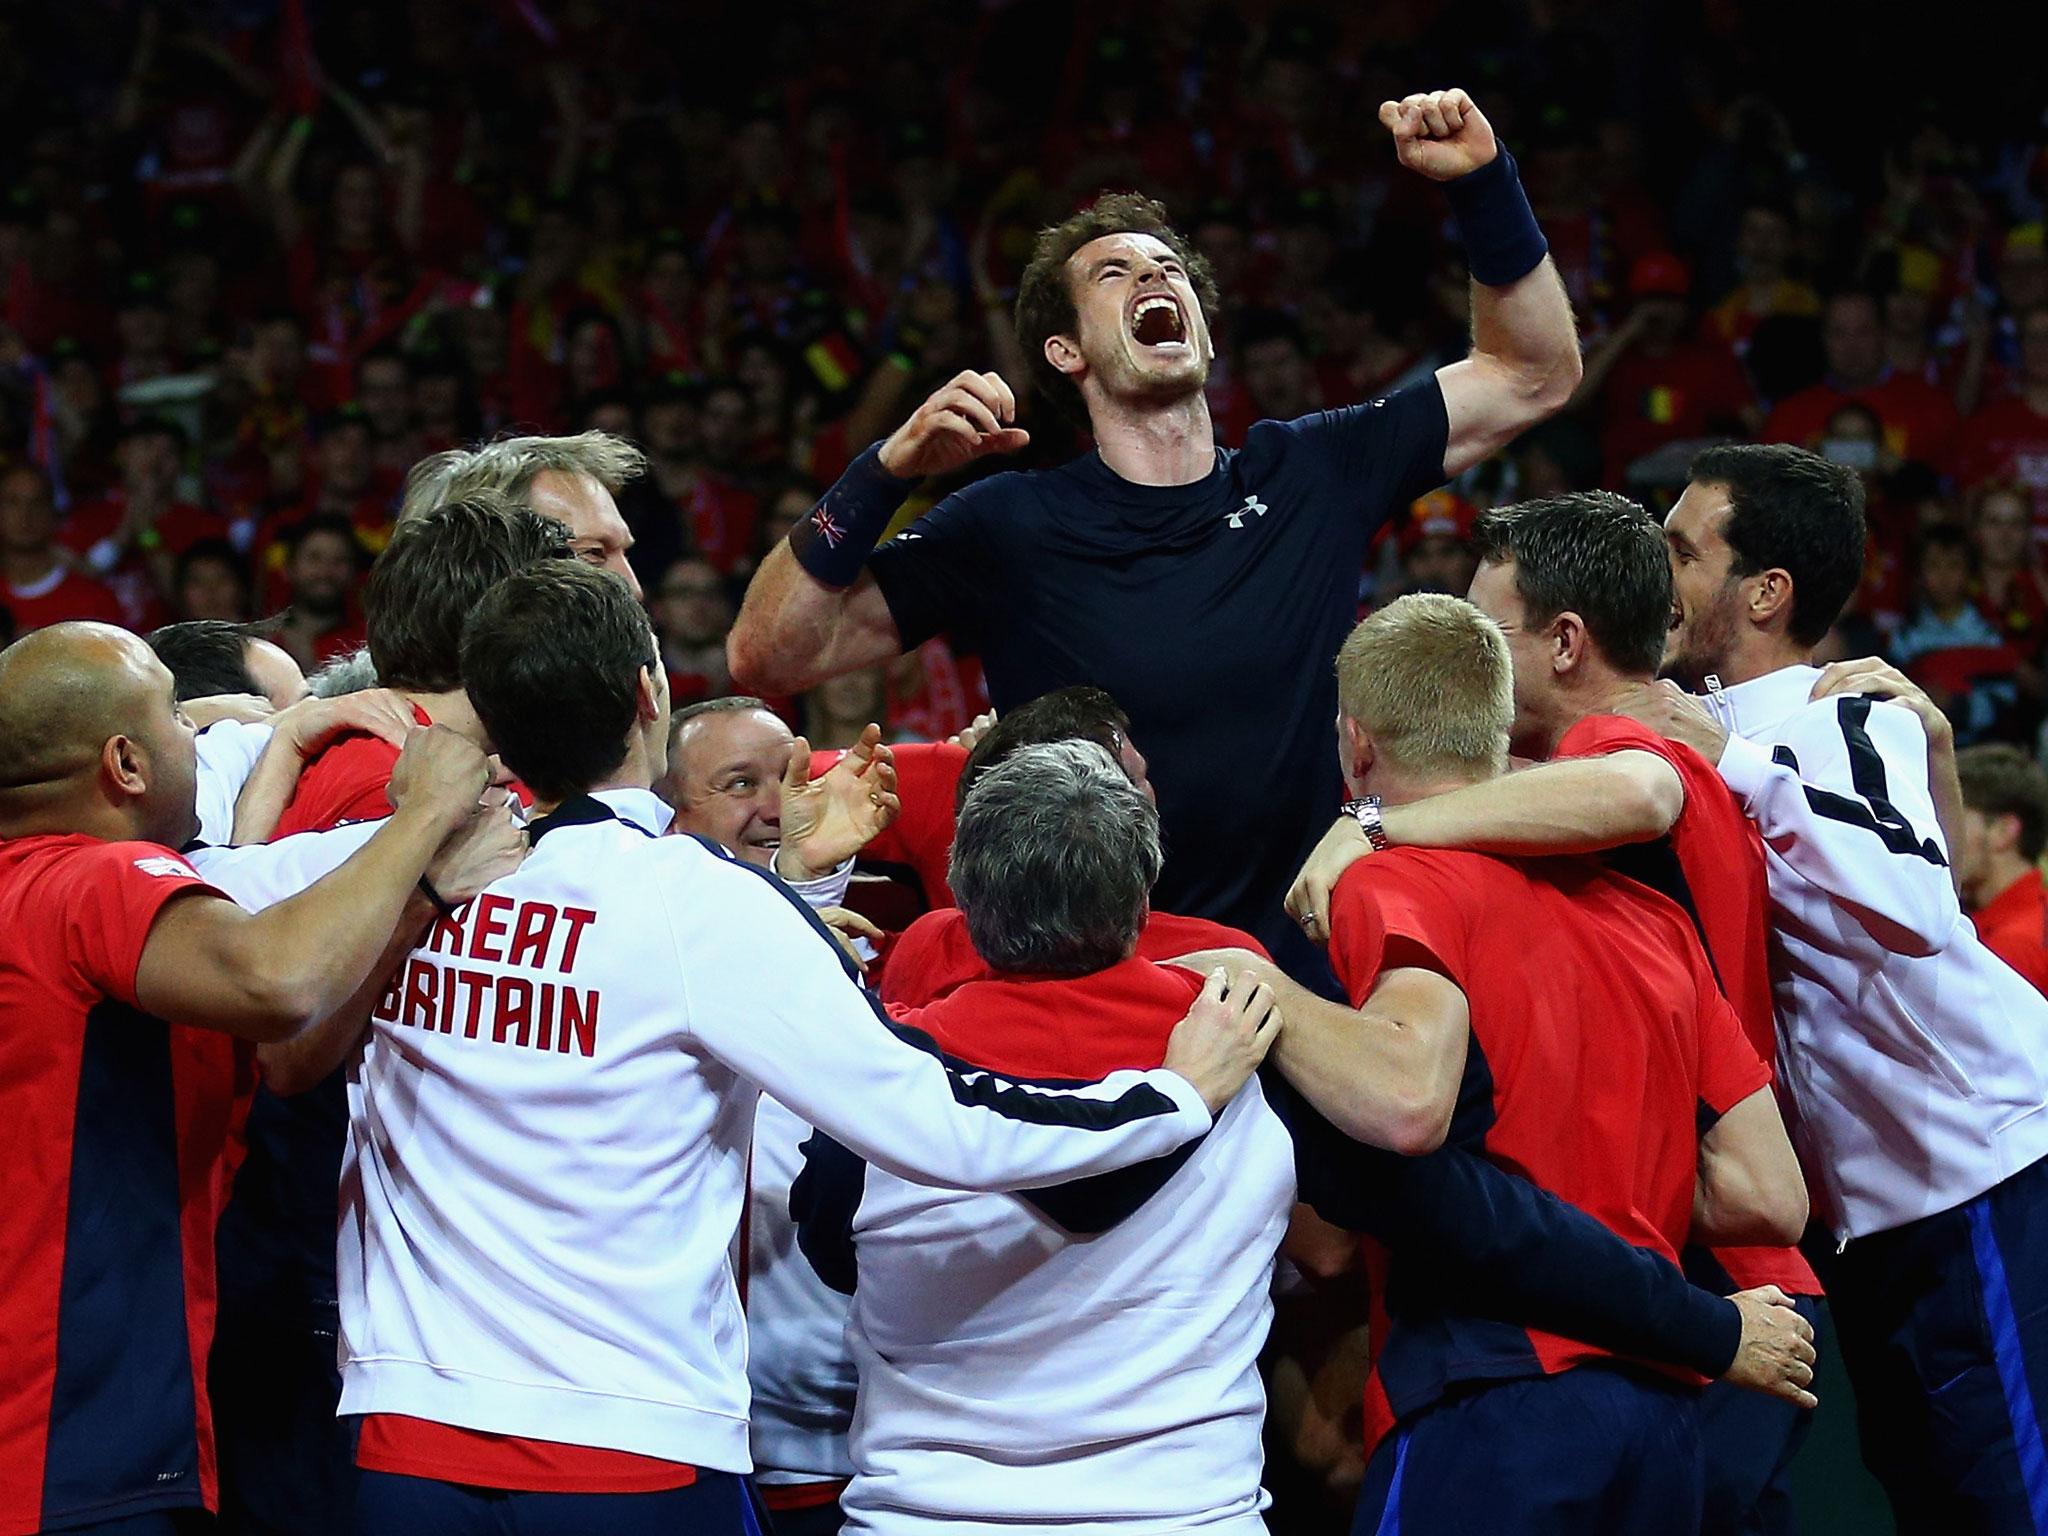 Murray helped Great Britain win the Davis Cup in 2015